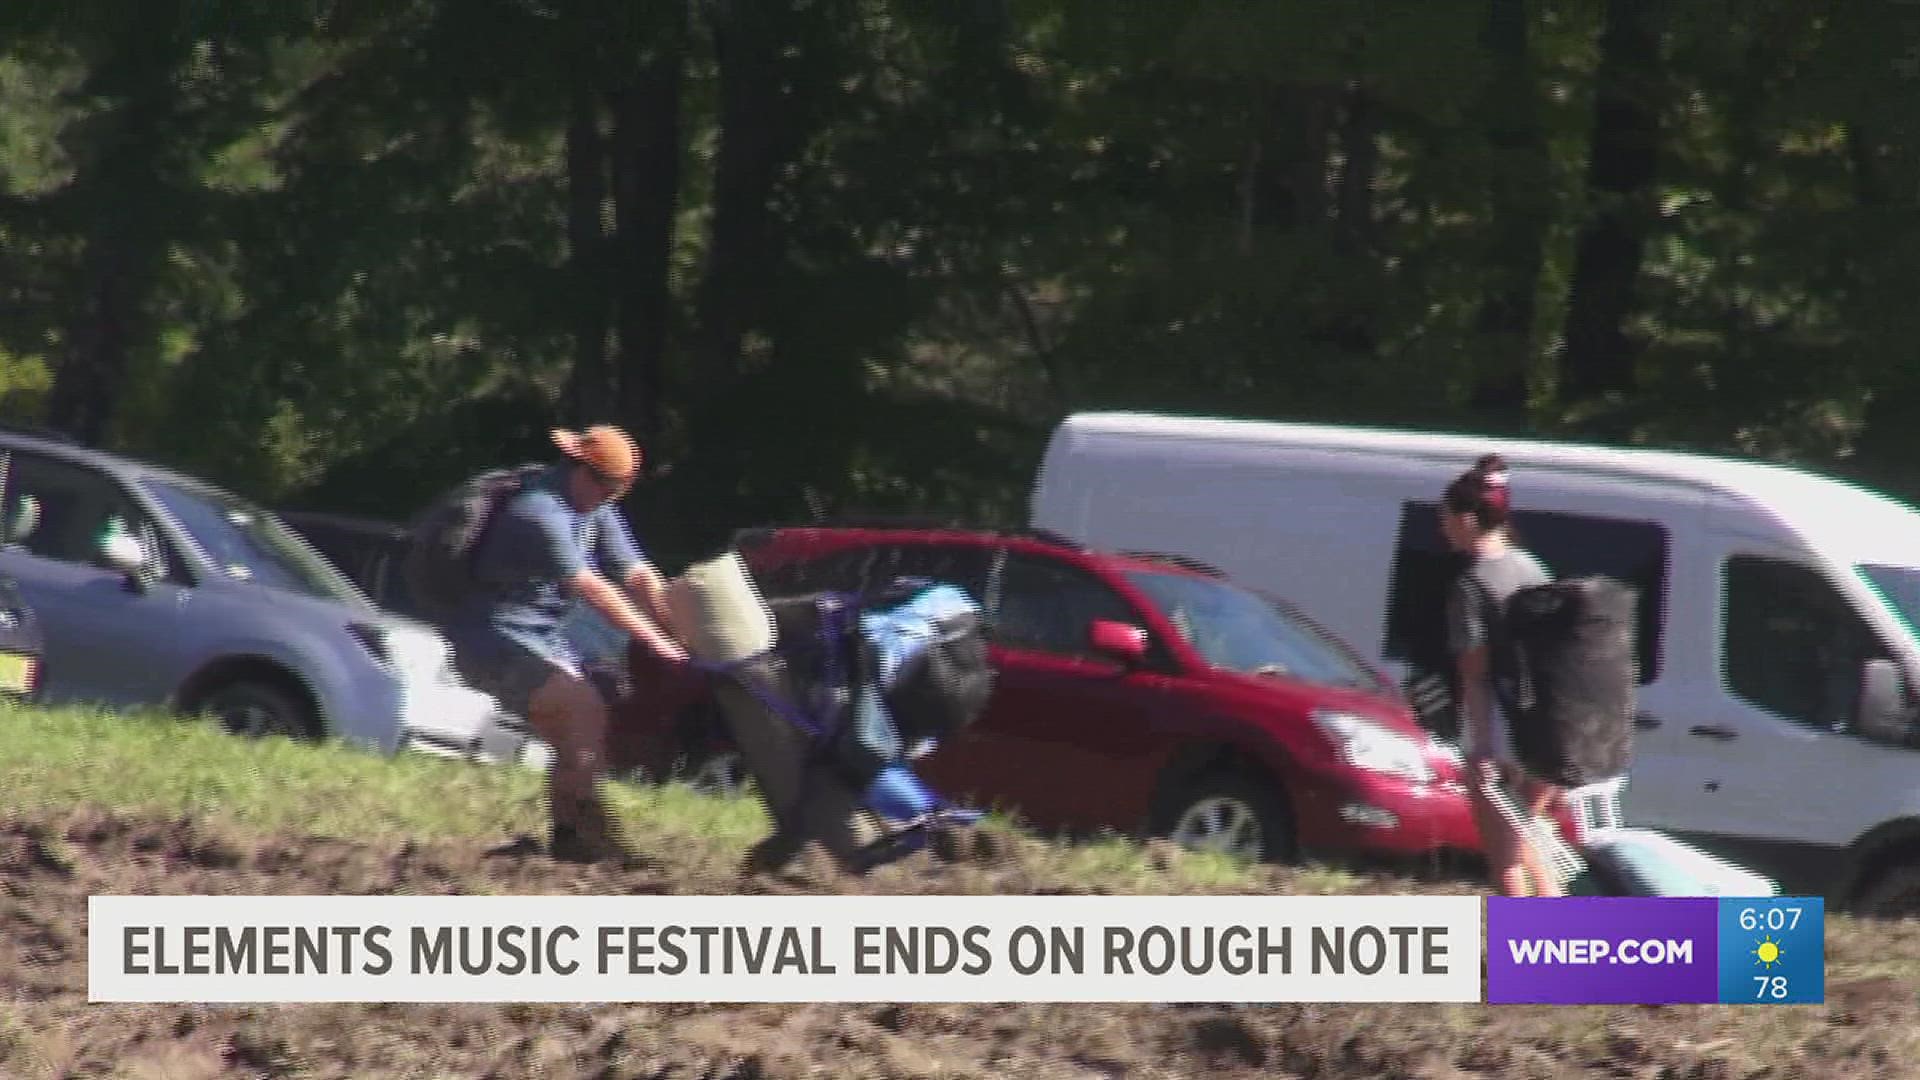 A three-day music festival was held in Wayne County over the weekend and some people who attended it called it a logistical nightmare.